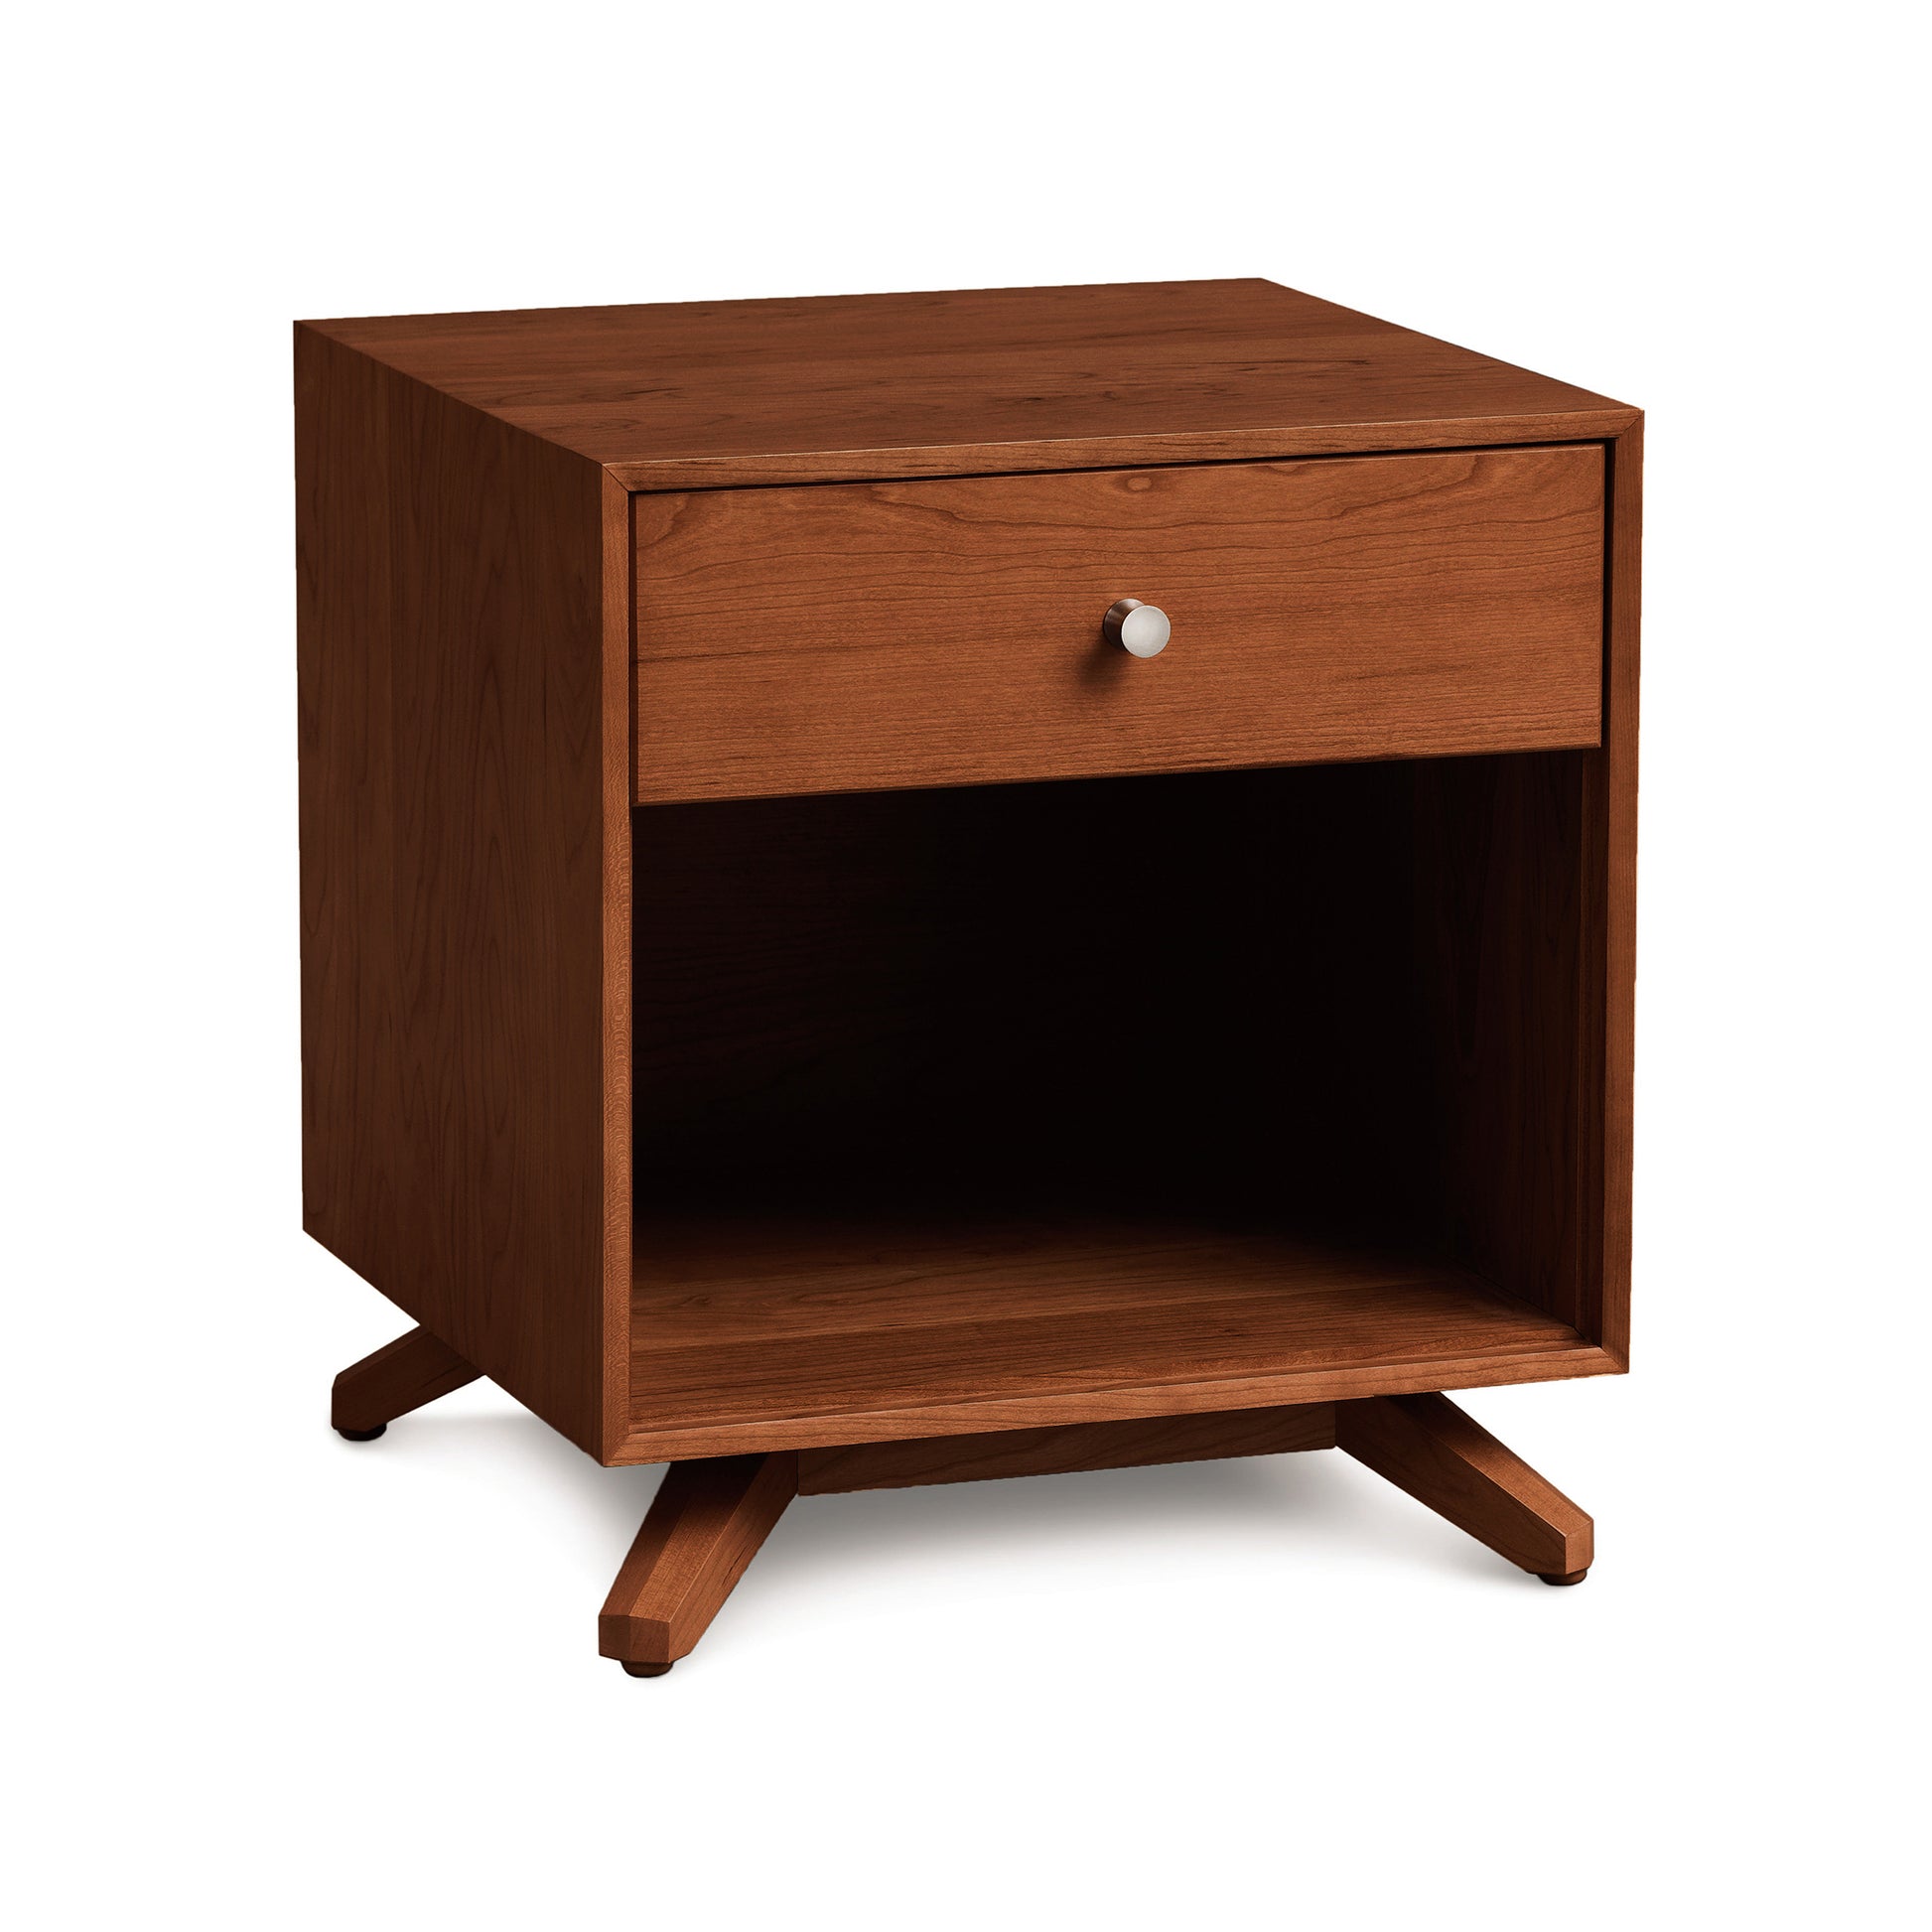 The Astrid 1-Drawer Enclosed Shelf Nightstand is a small, handcrafted piece of contemporary furniture made in Vermont by Copeland Furniture.